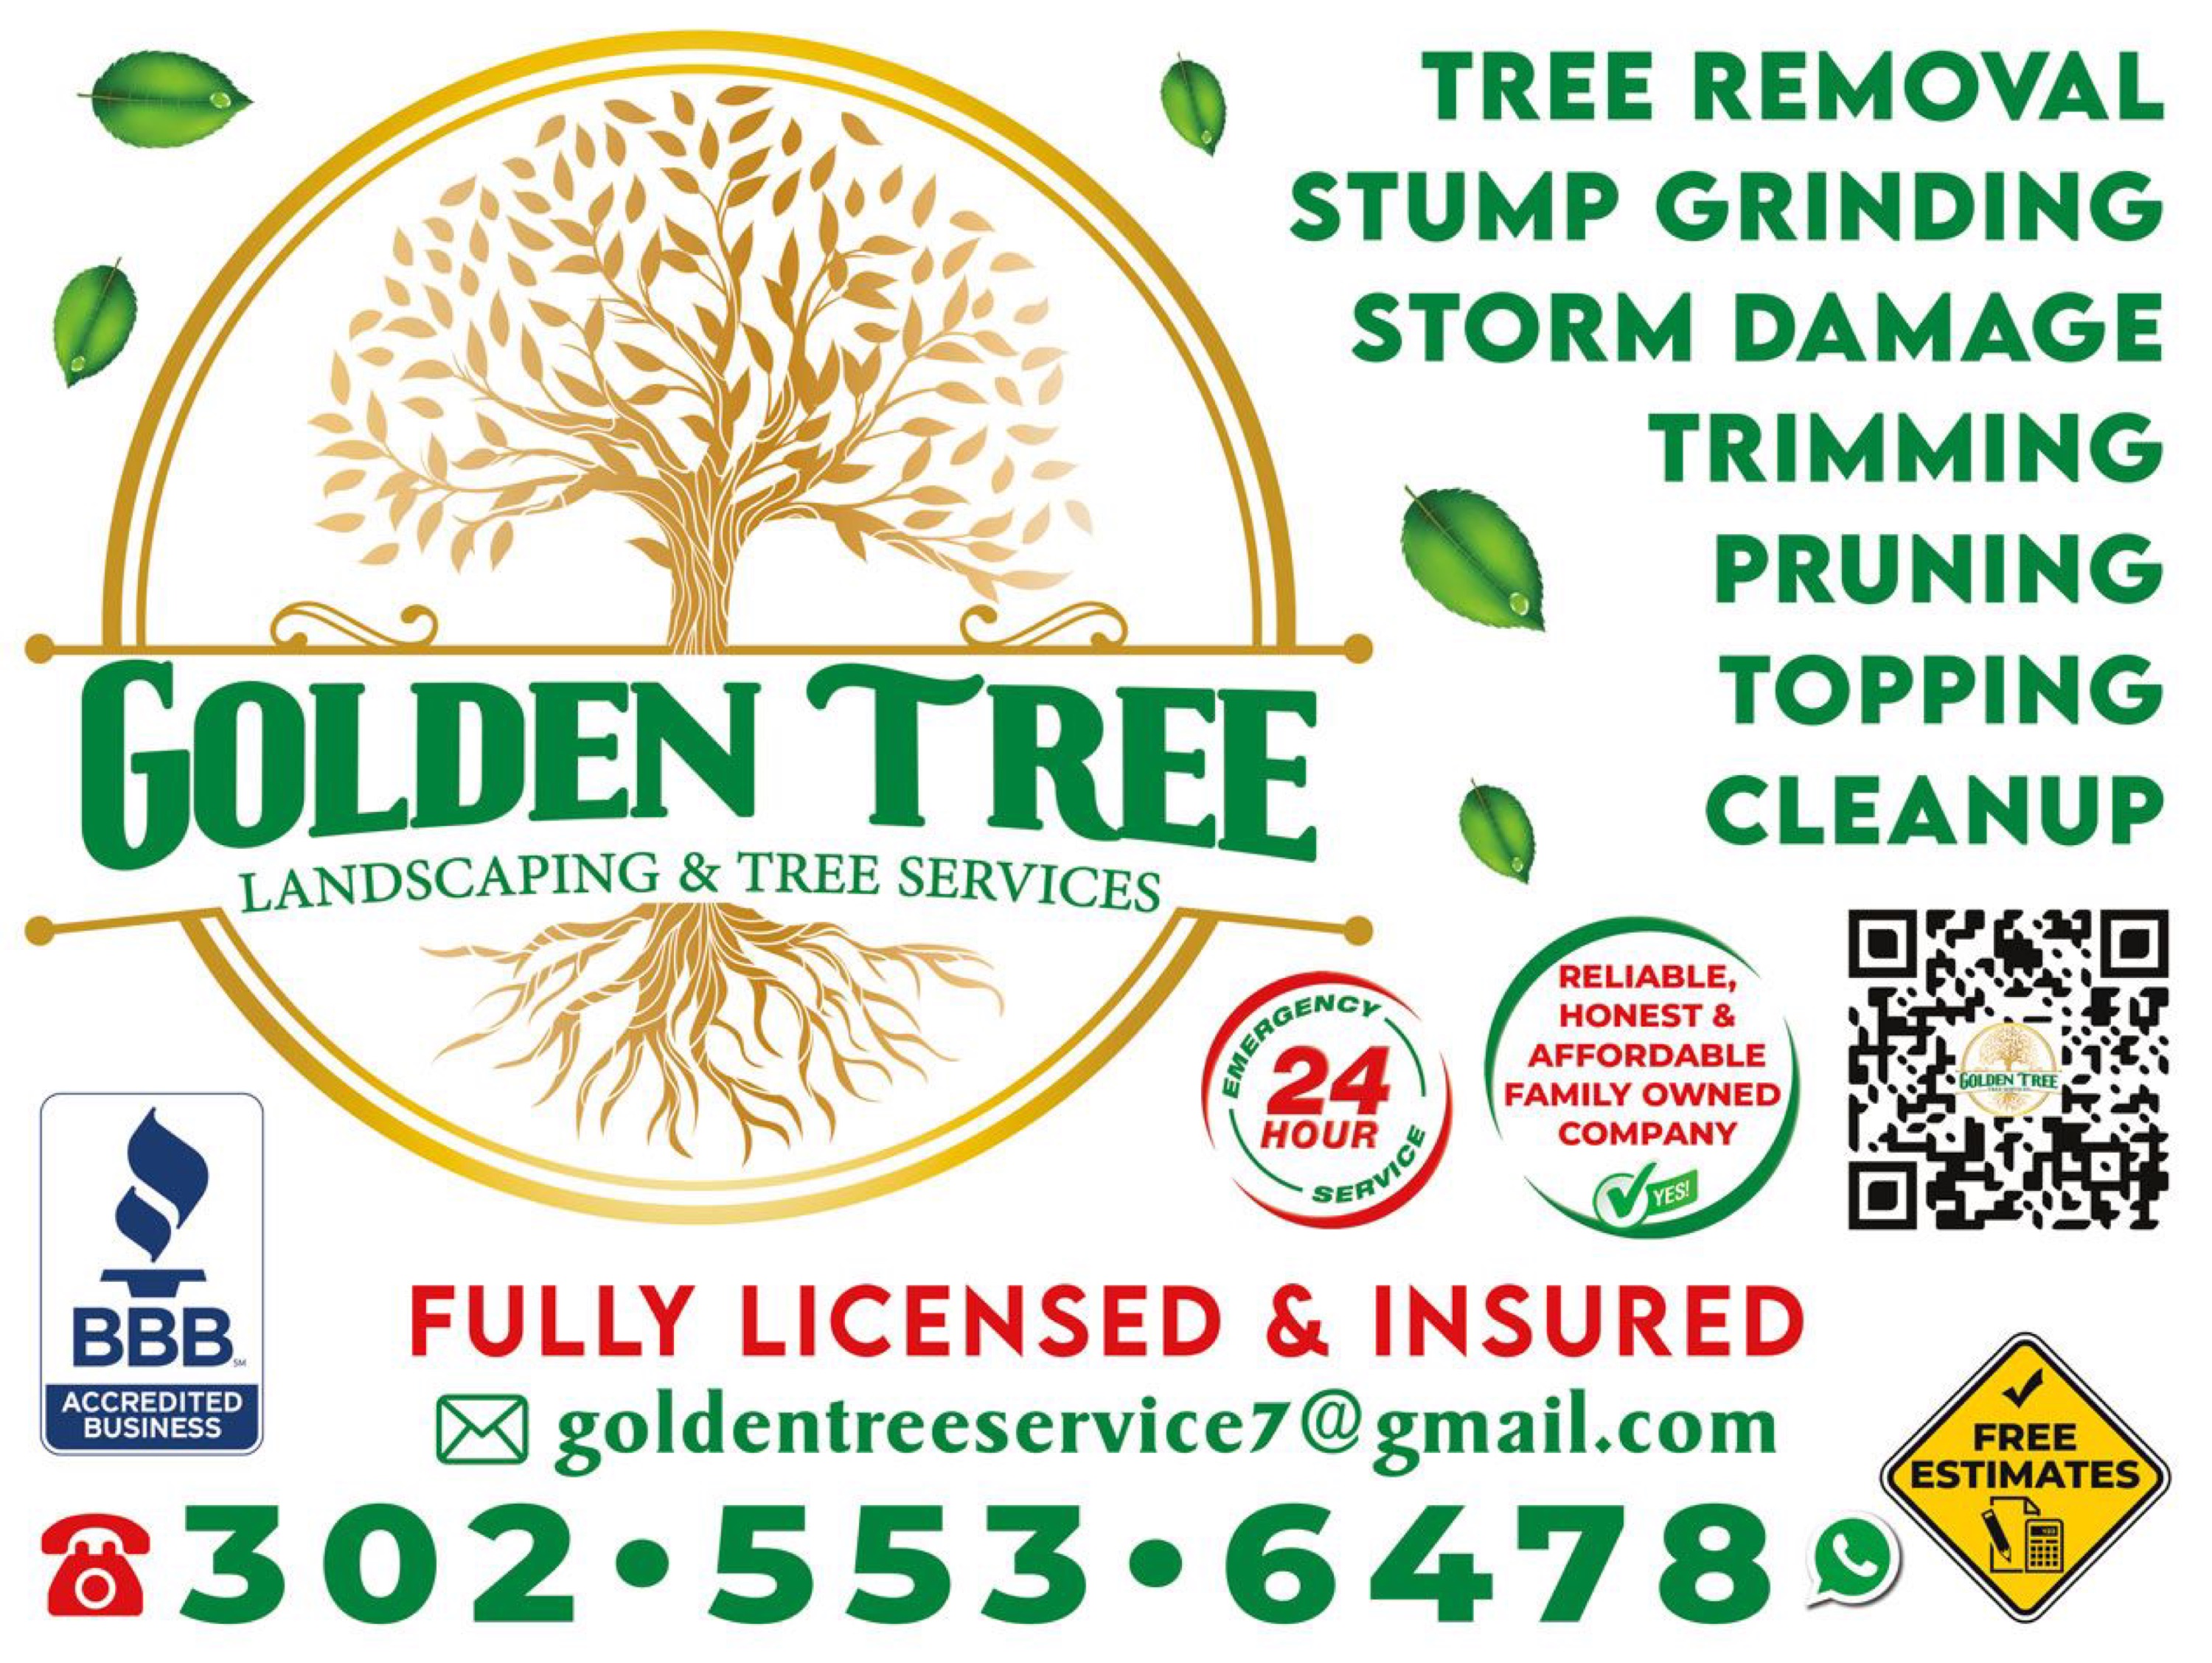 Golden Tree Landscaping & Tree Services Logo